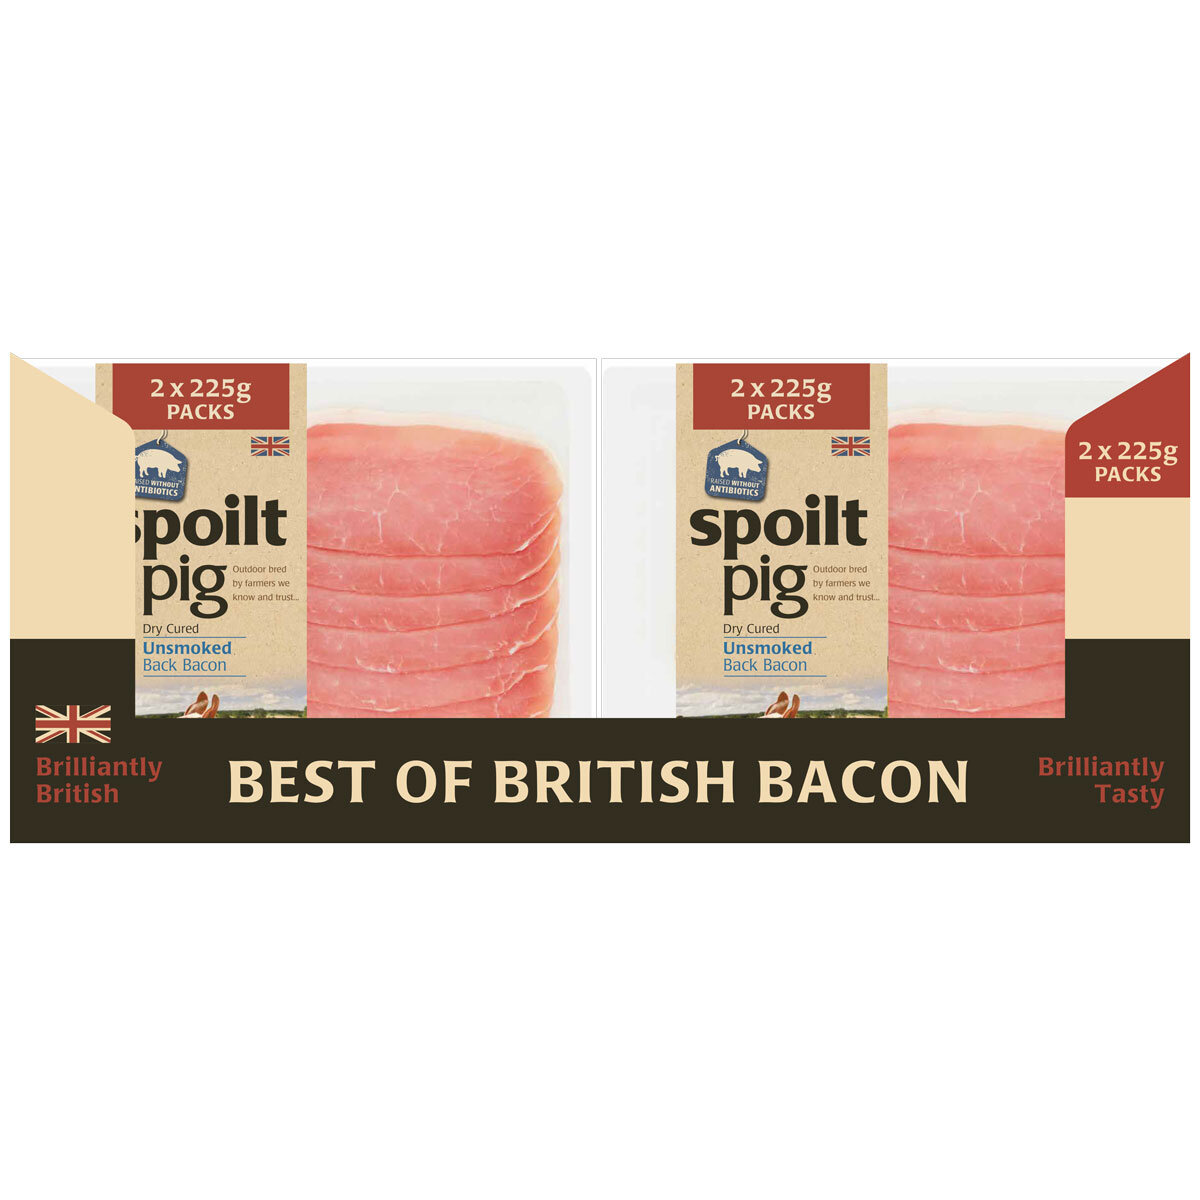 Spoilt Pig Bacon in packaging